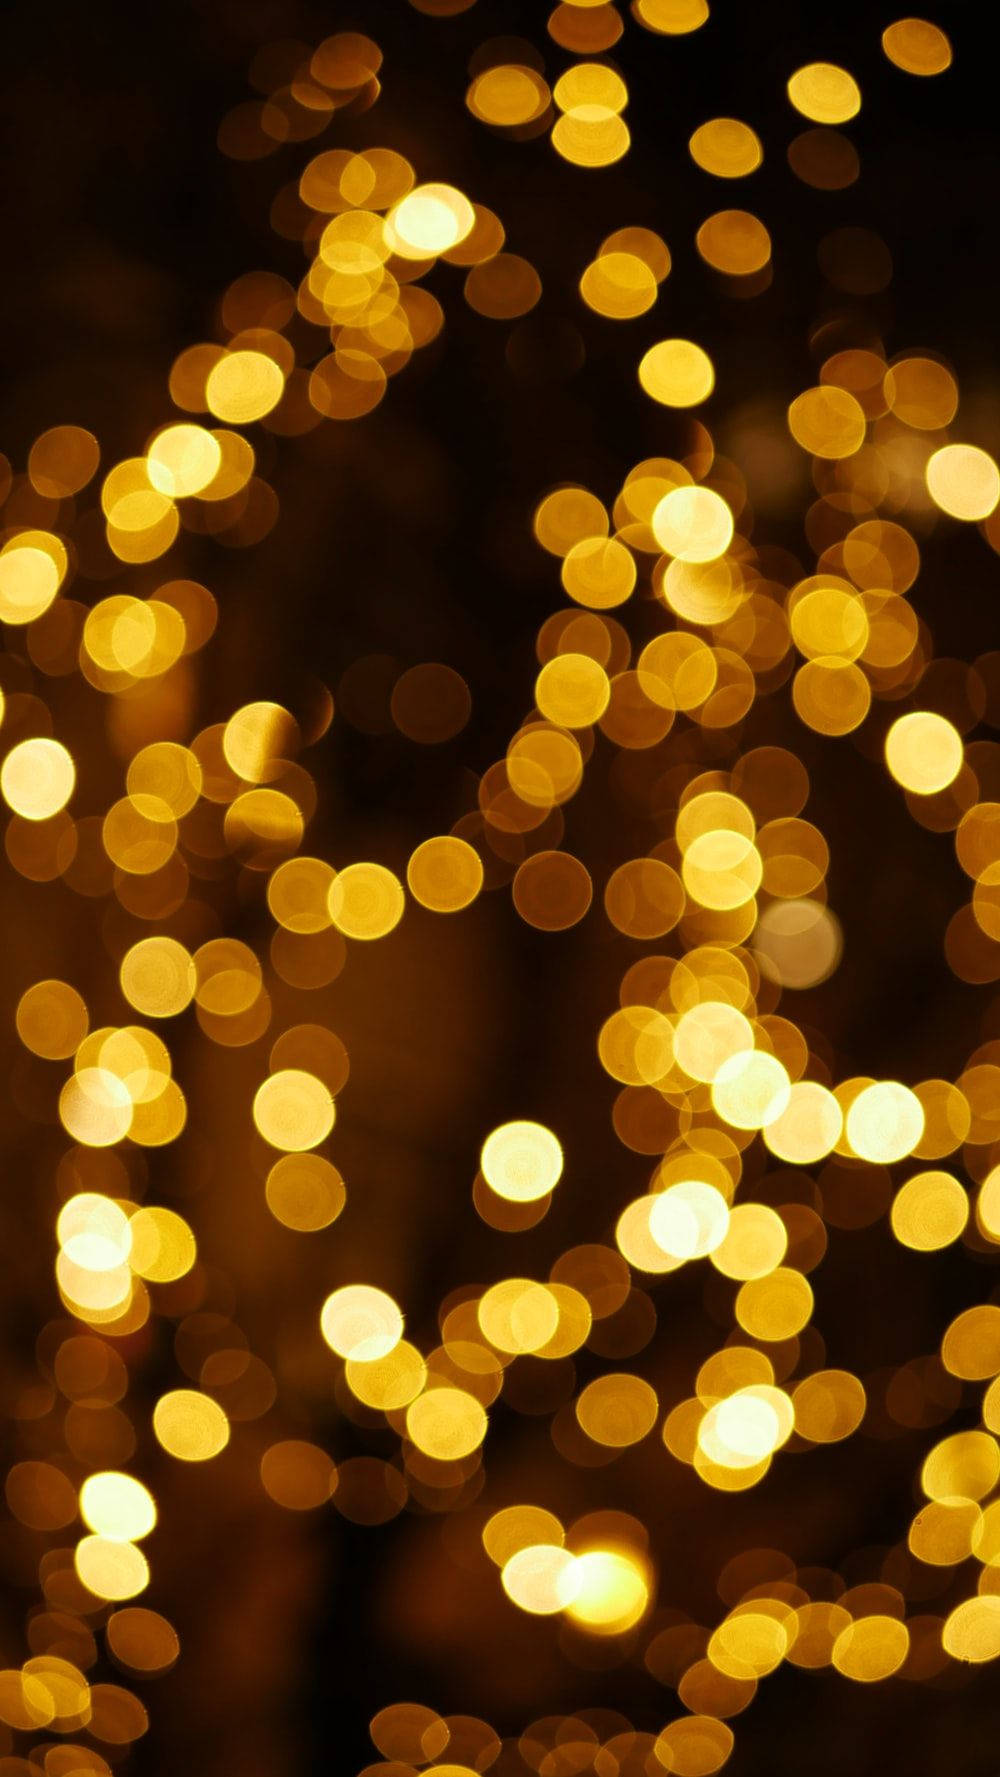 Brighten up the Holidays with Yellow Christmas Lights Wallpaper